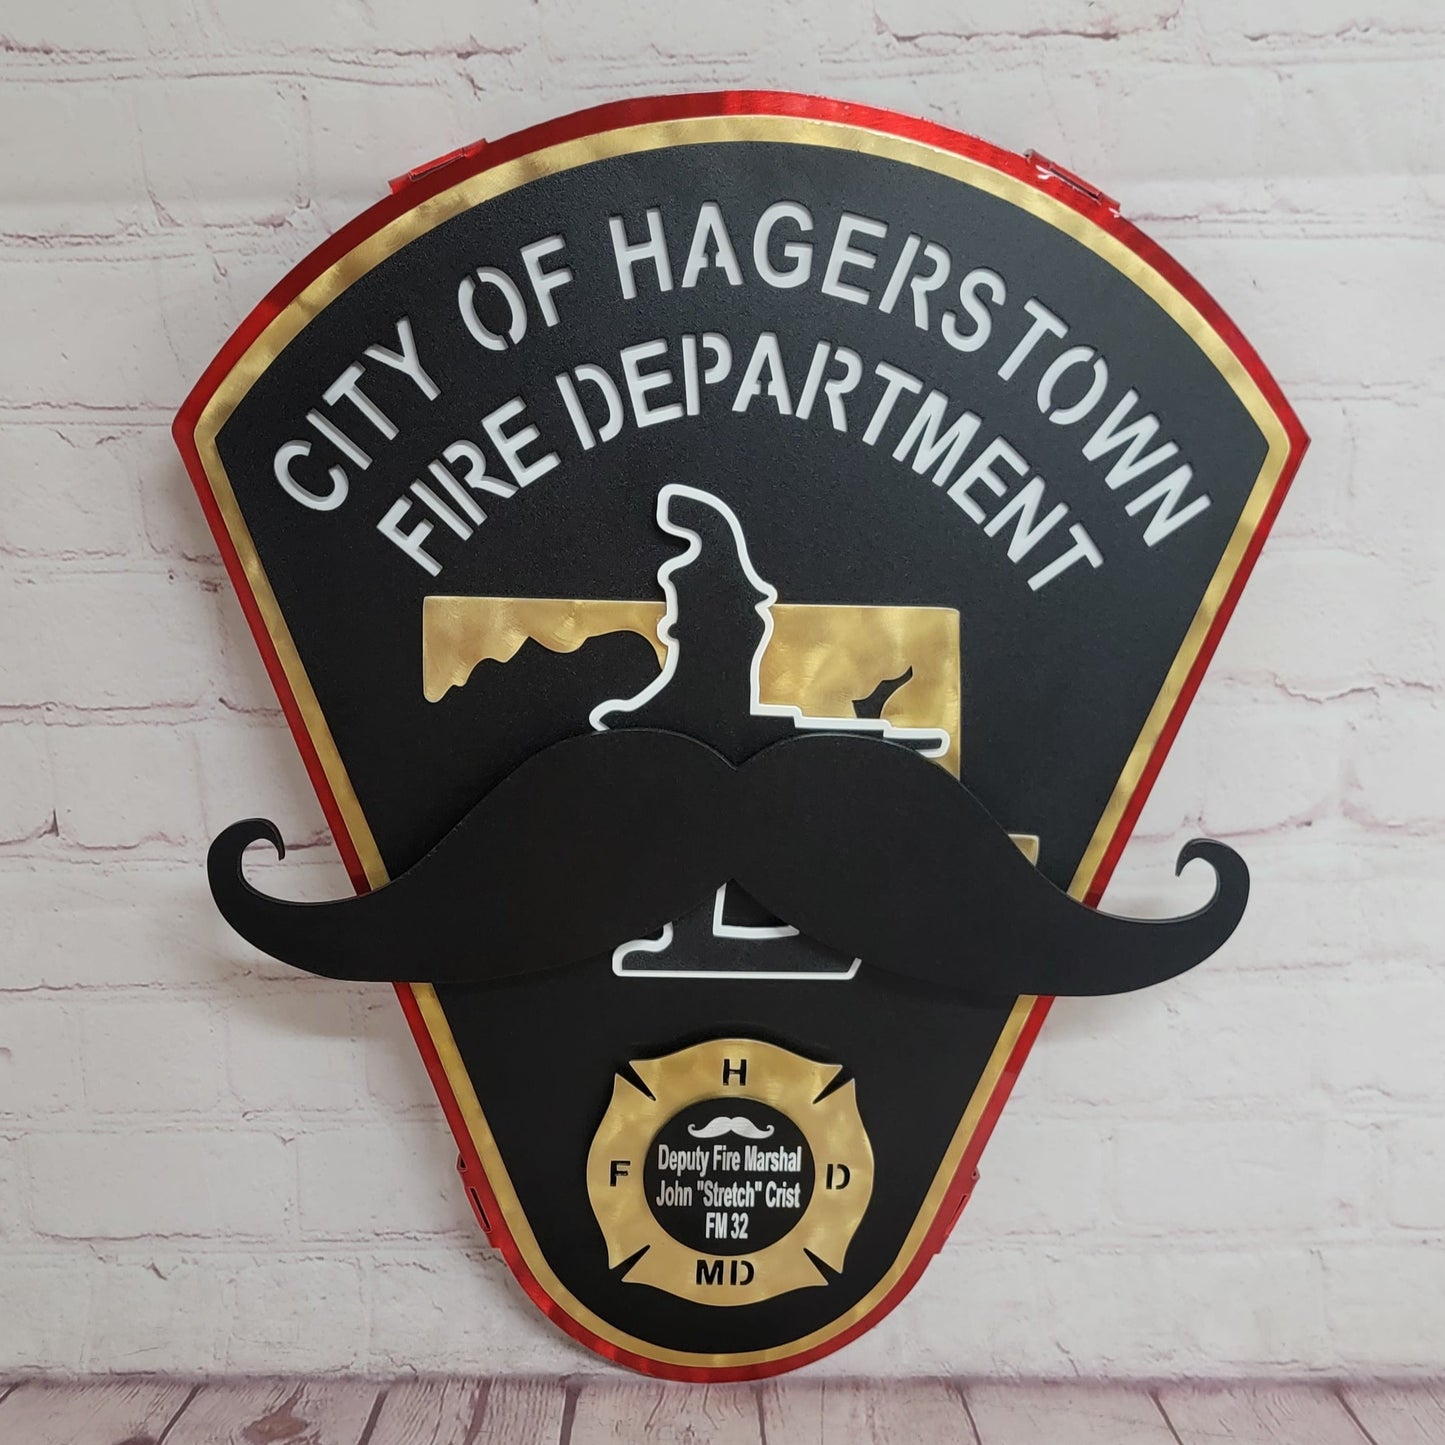 City Of Hagerstown Fire Department